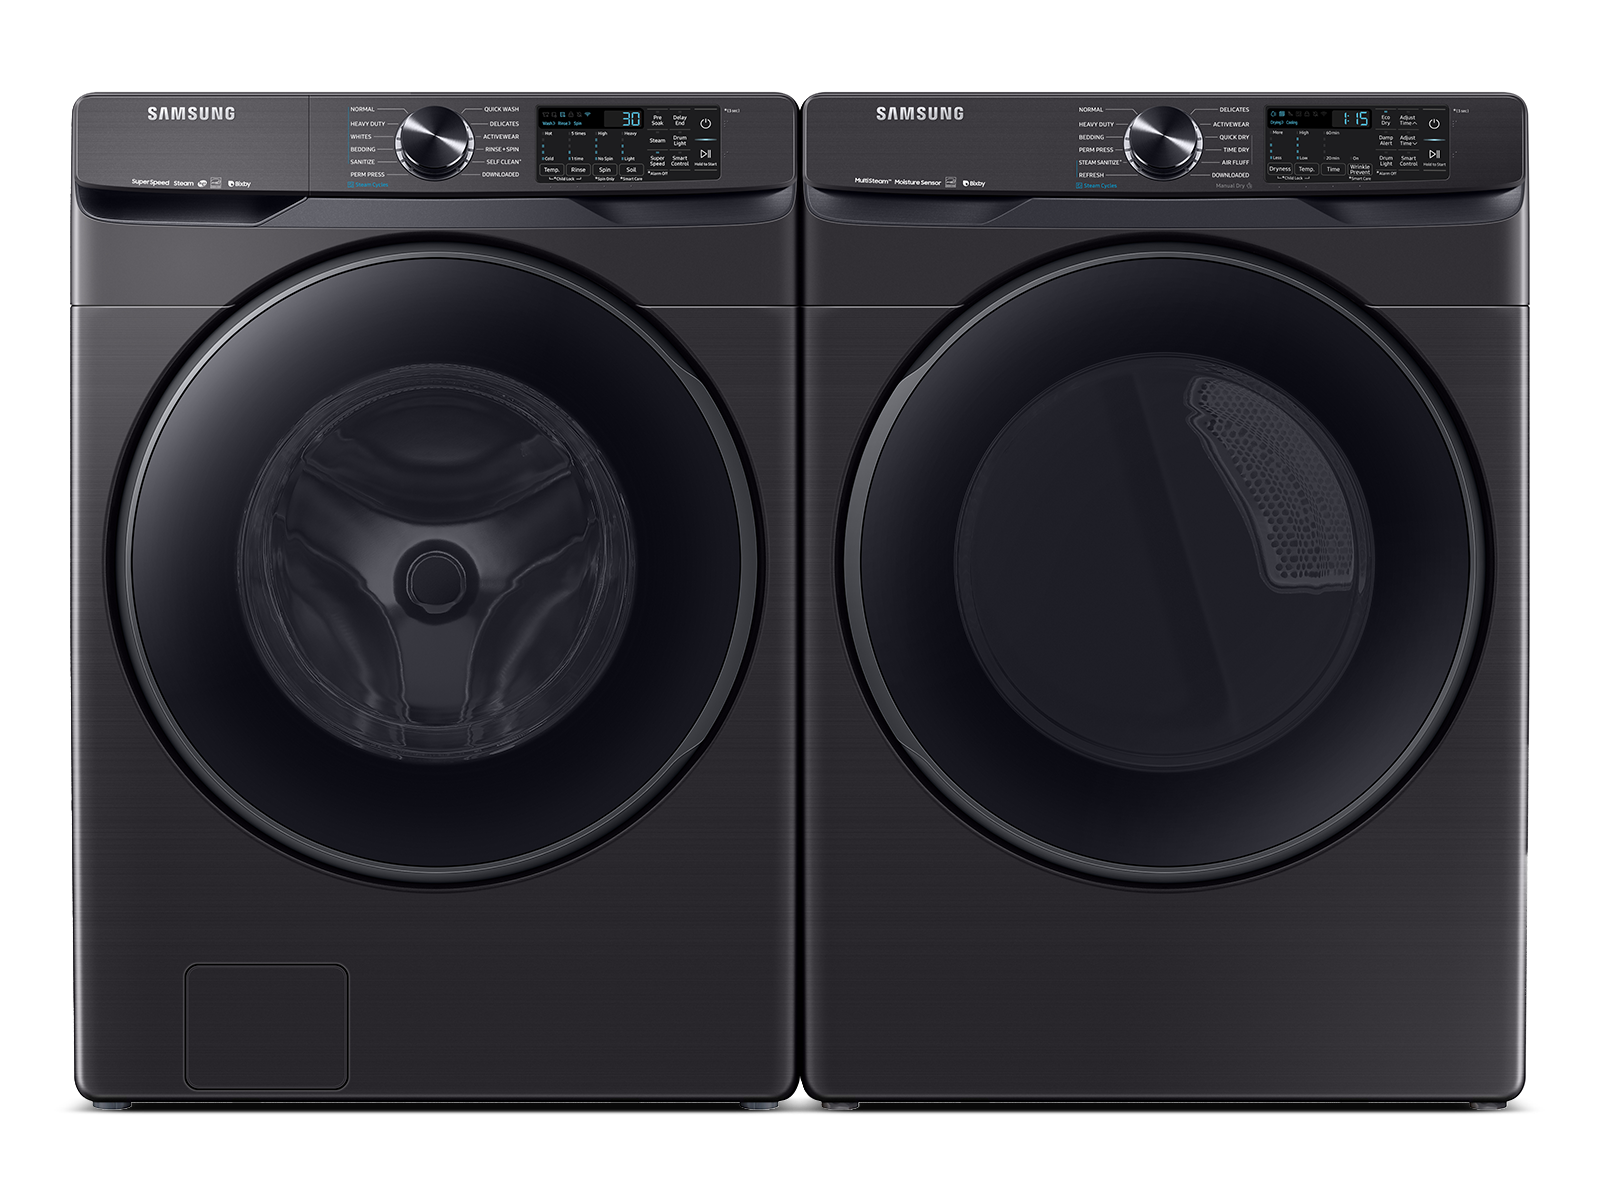 Samsung Smart Front Load Washer & Dryer Set with Super Speed and Steam Sanitize+ in Black Stainless Steel(BNDL-1646290212623)